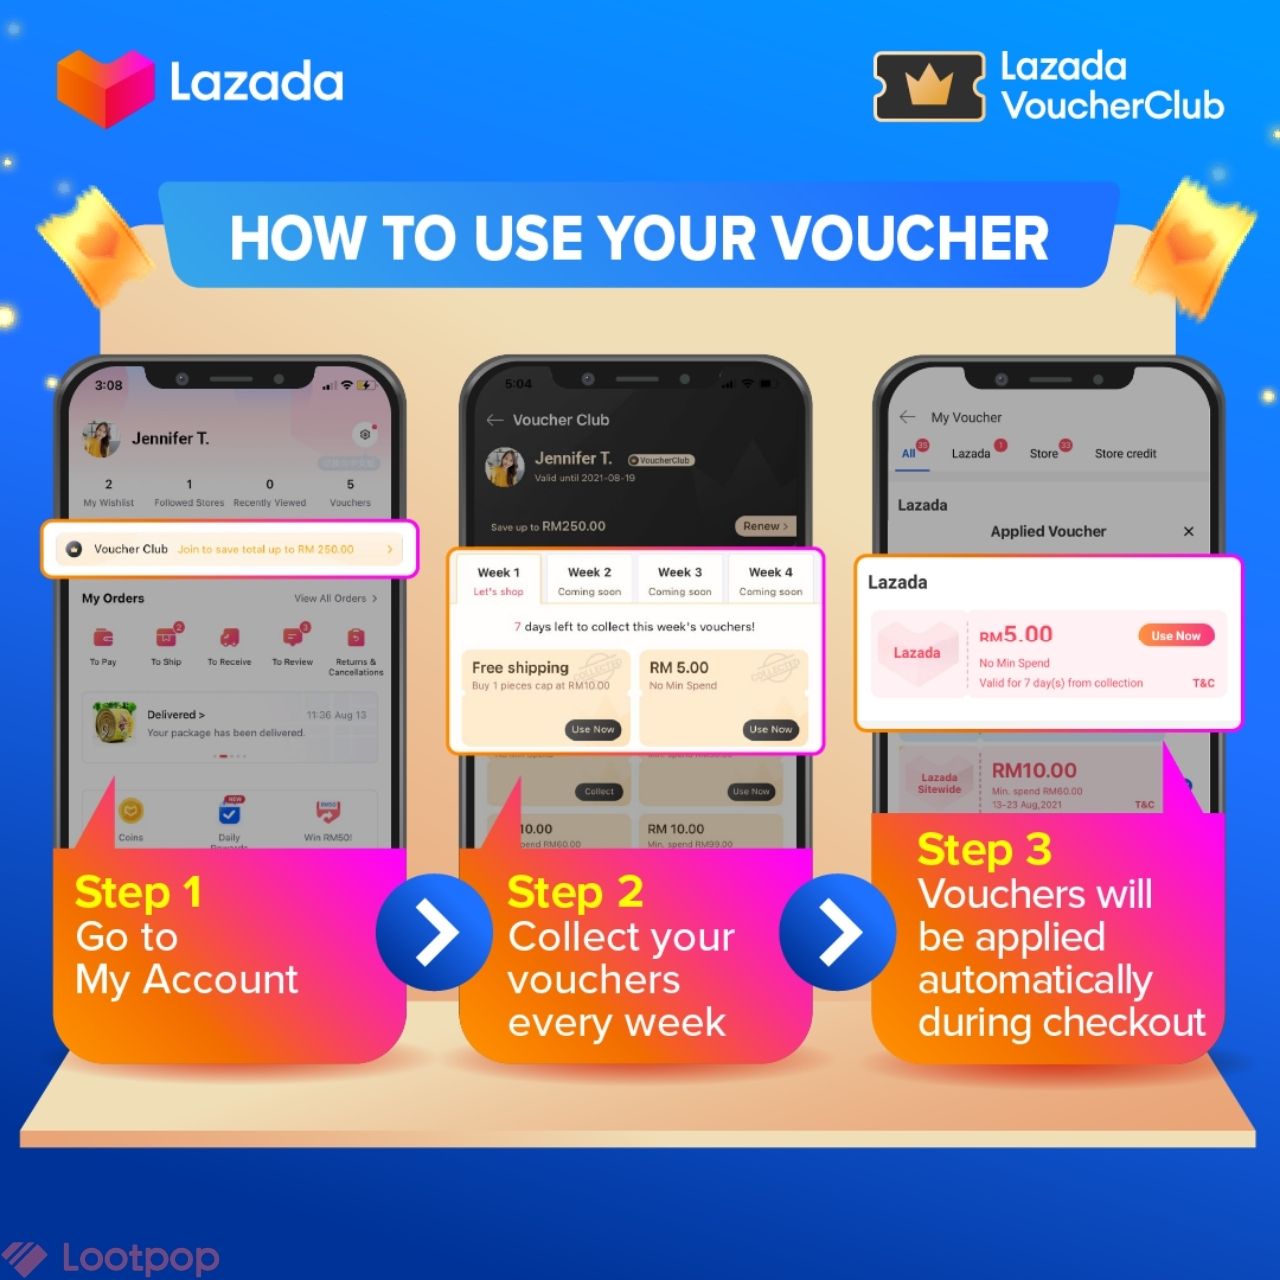 Join Lazada Voucher Club for Exclusive Savings Plan